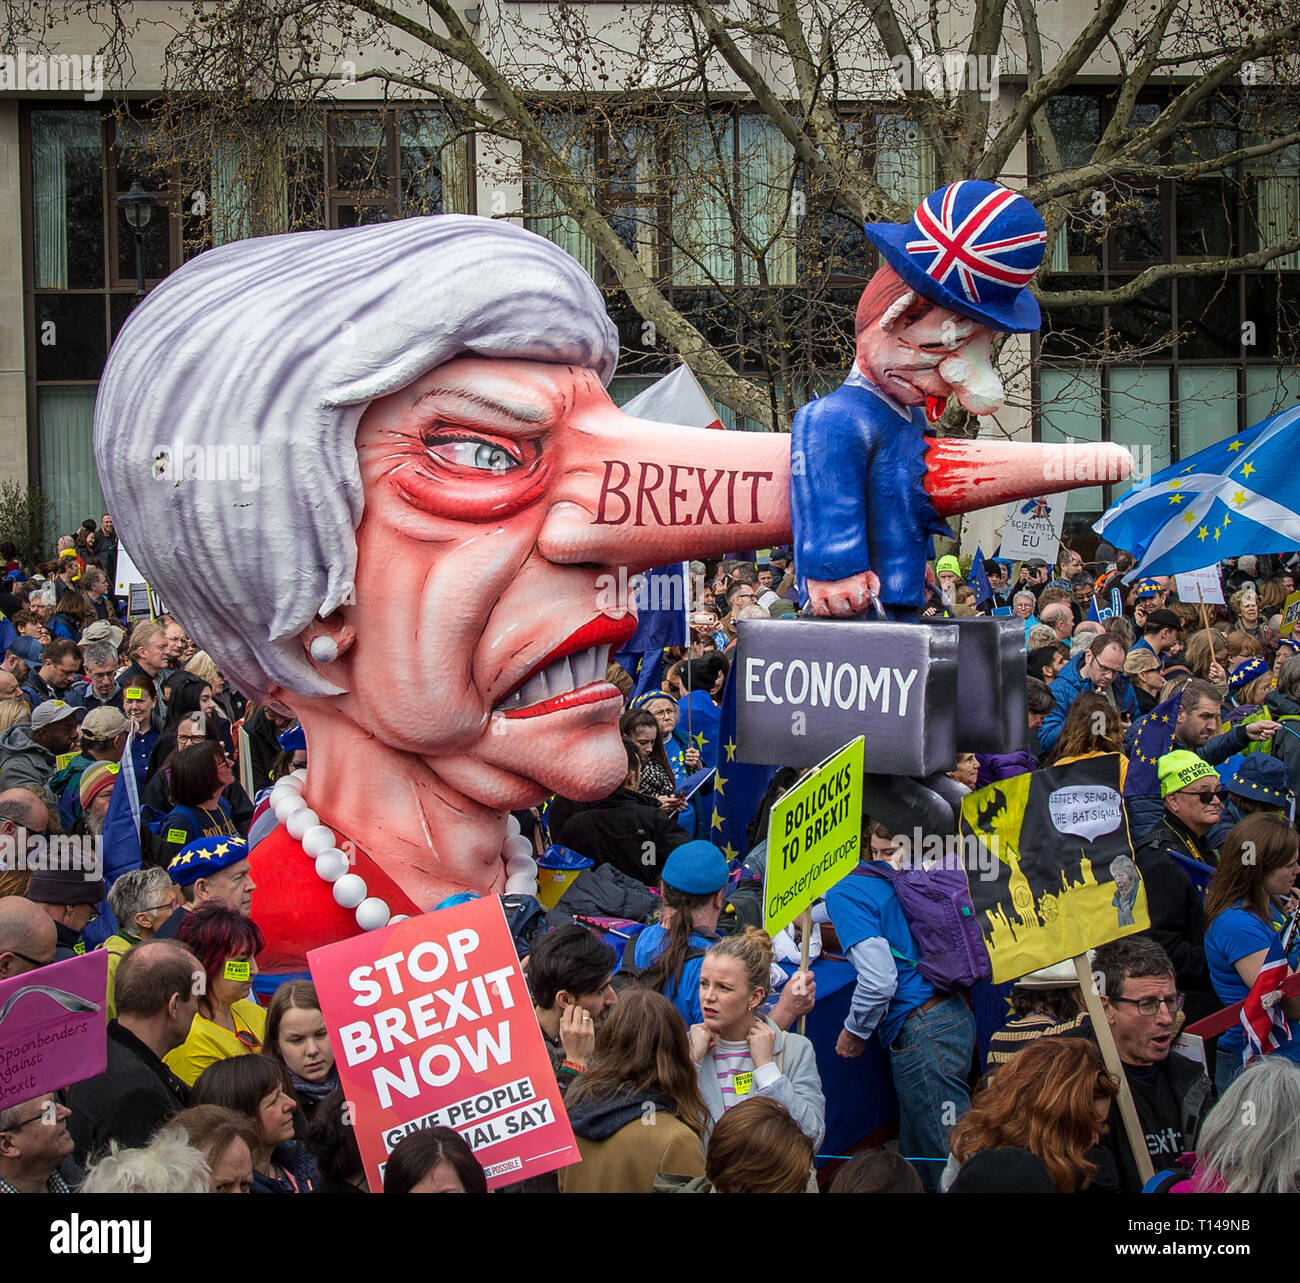 London, UK. 23rd March, 2019. Thousands descend on London for Put it to the People protest demanding a second referendum in a BREXIT march in central LONDON on 23 March 2019. Photo by Andy Rowland. Credit: Andrew Rowland/Alamy Live News Stock Photo